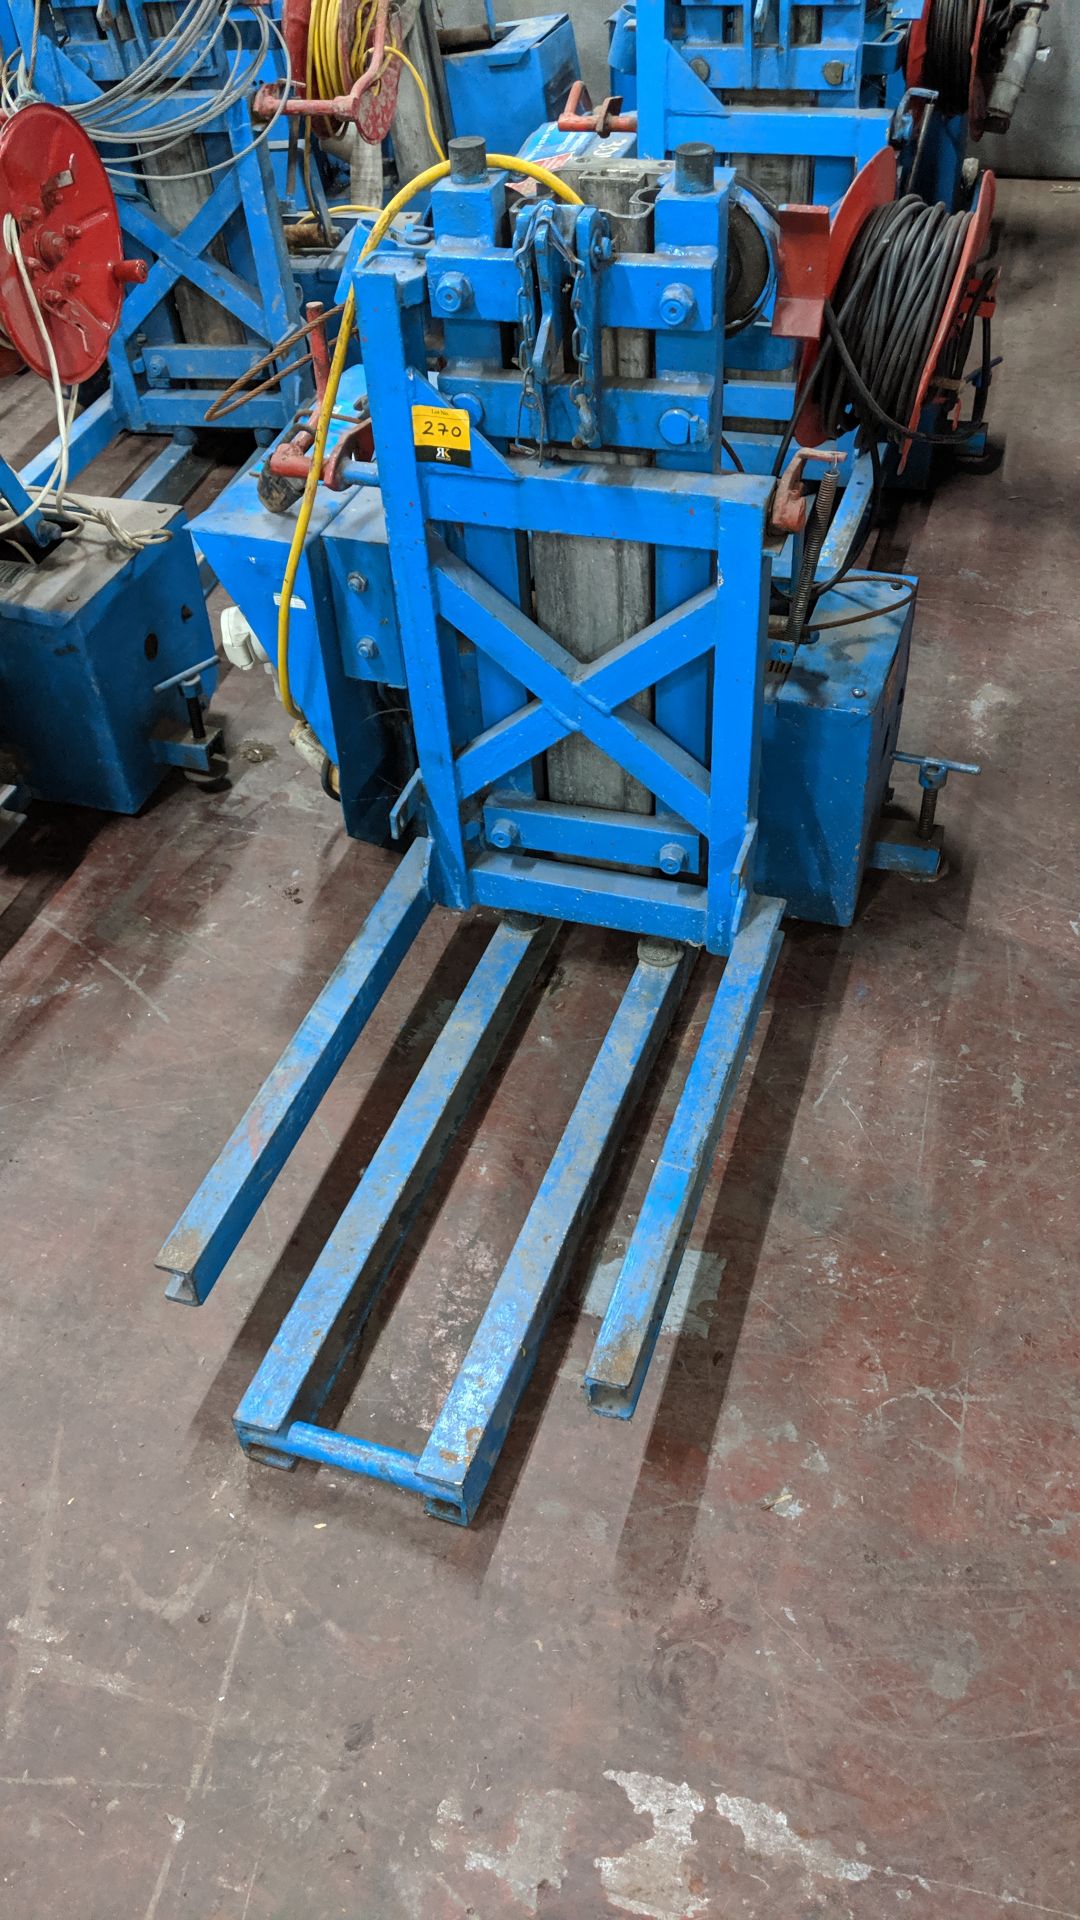 3 off Steinweg Superlift 200kg lifting devices/hoists NB. We are insufficiently expert to - Image 3 of 14